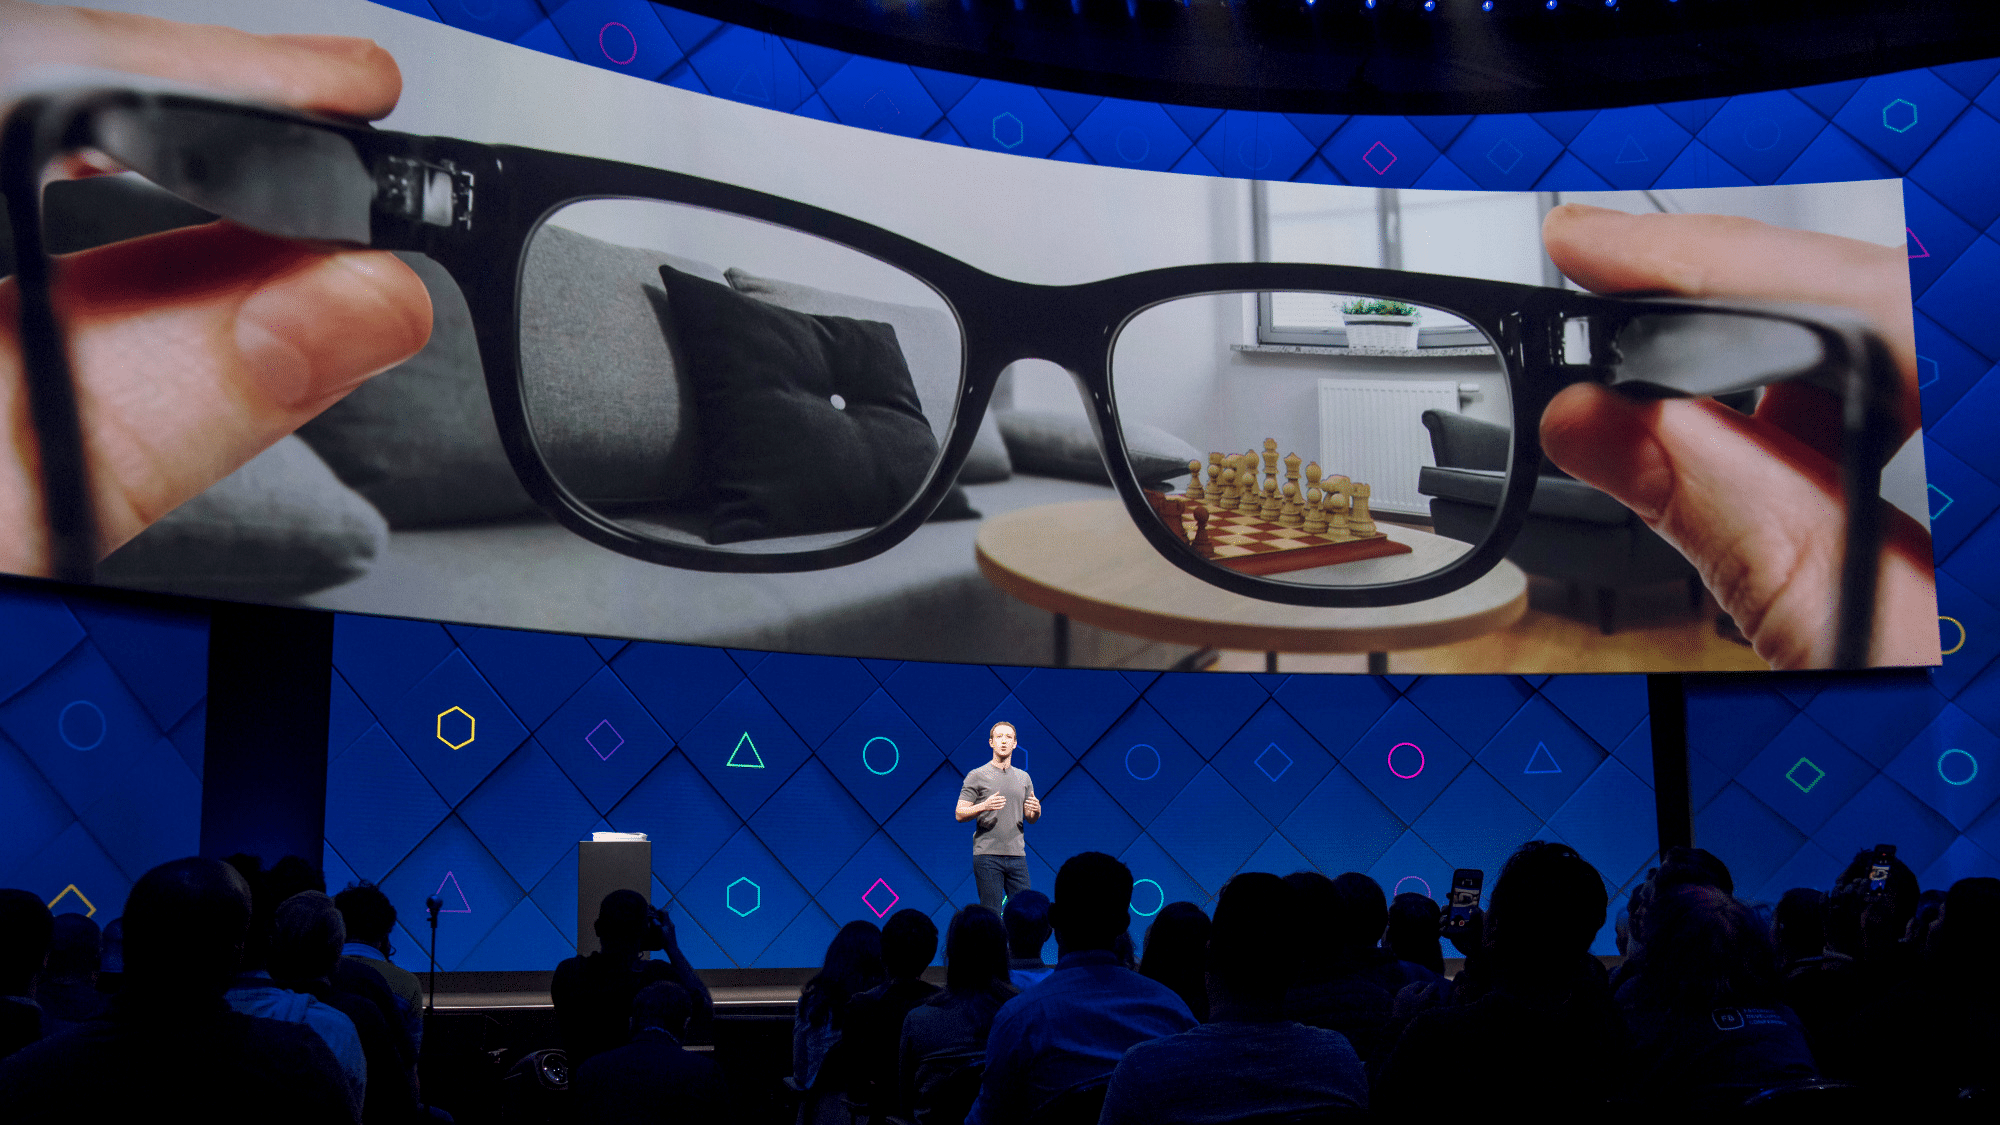 Meta AR Glasses Lead Claims They’re As Mindblowing As The Rift